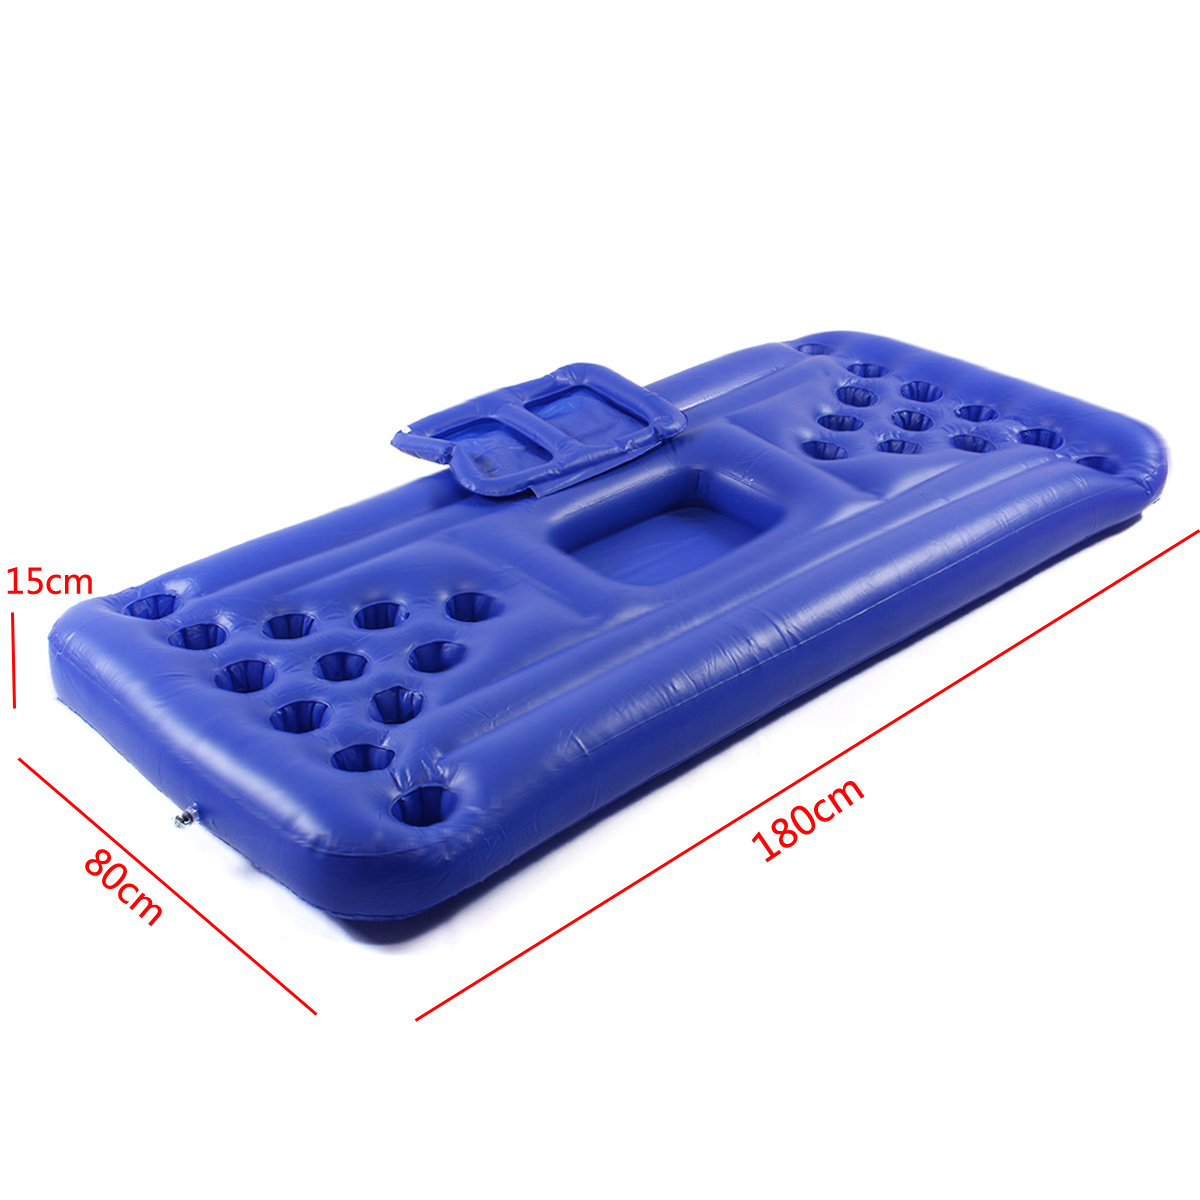 24-Holder-Inflatable-Beer-Pong-Ball-Table-Water-Floating-Raft-Lounge-Swim-Pool-Party-Game-1257106